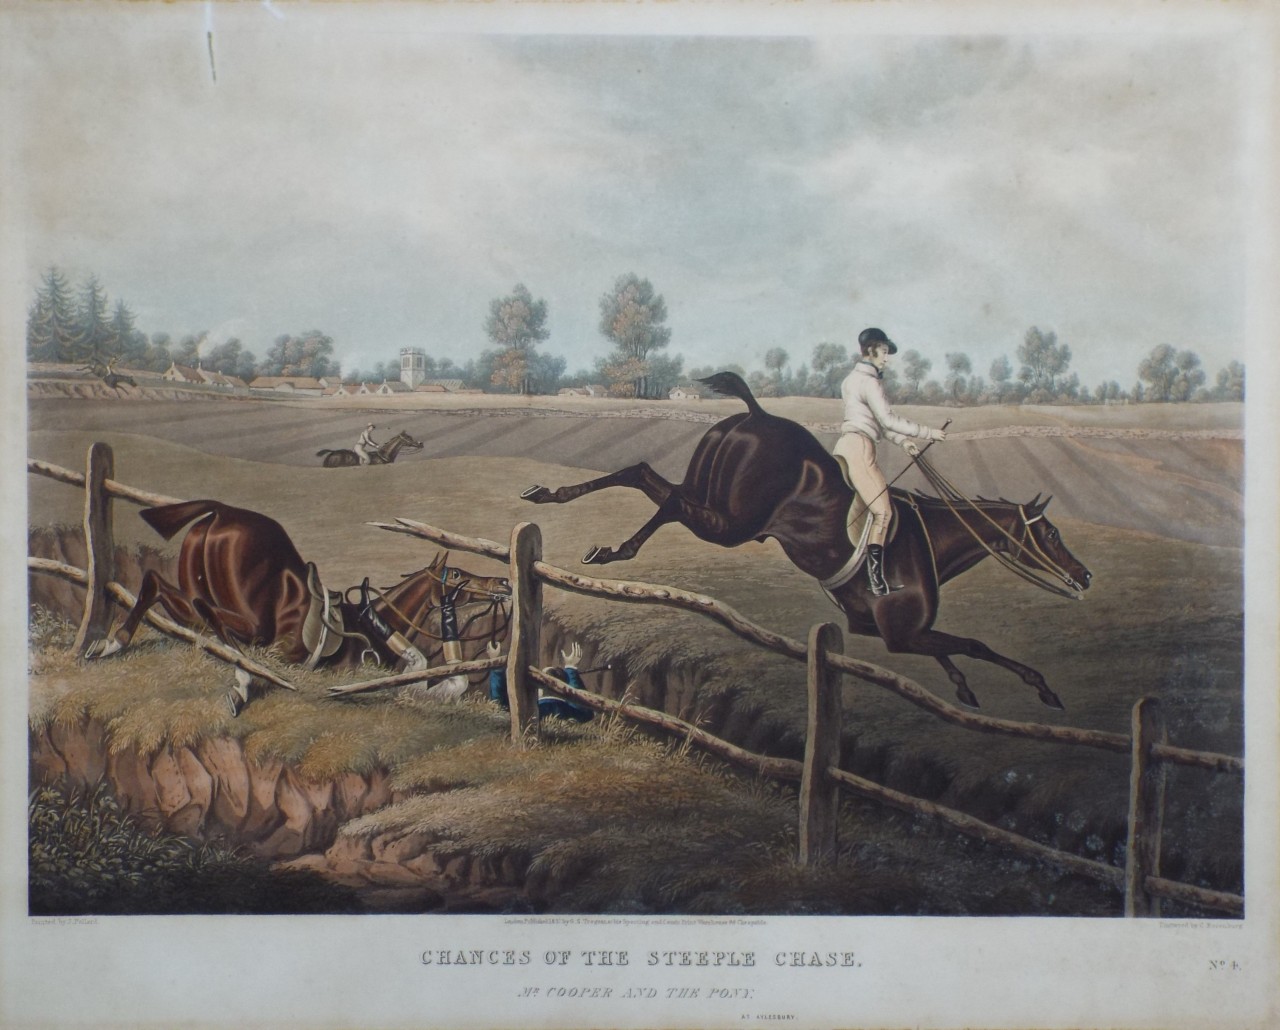 Aquatint - Chances of the Steeple Chase. 4. Mr. Cooper and the Pony. at Aylesbury. - Rosenburg